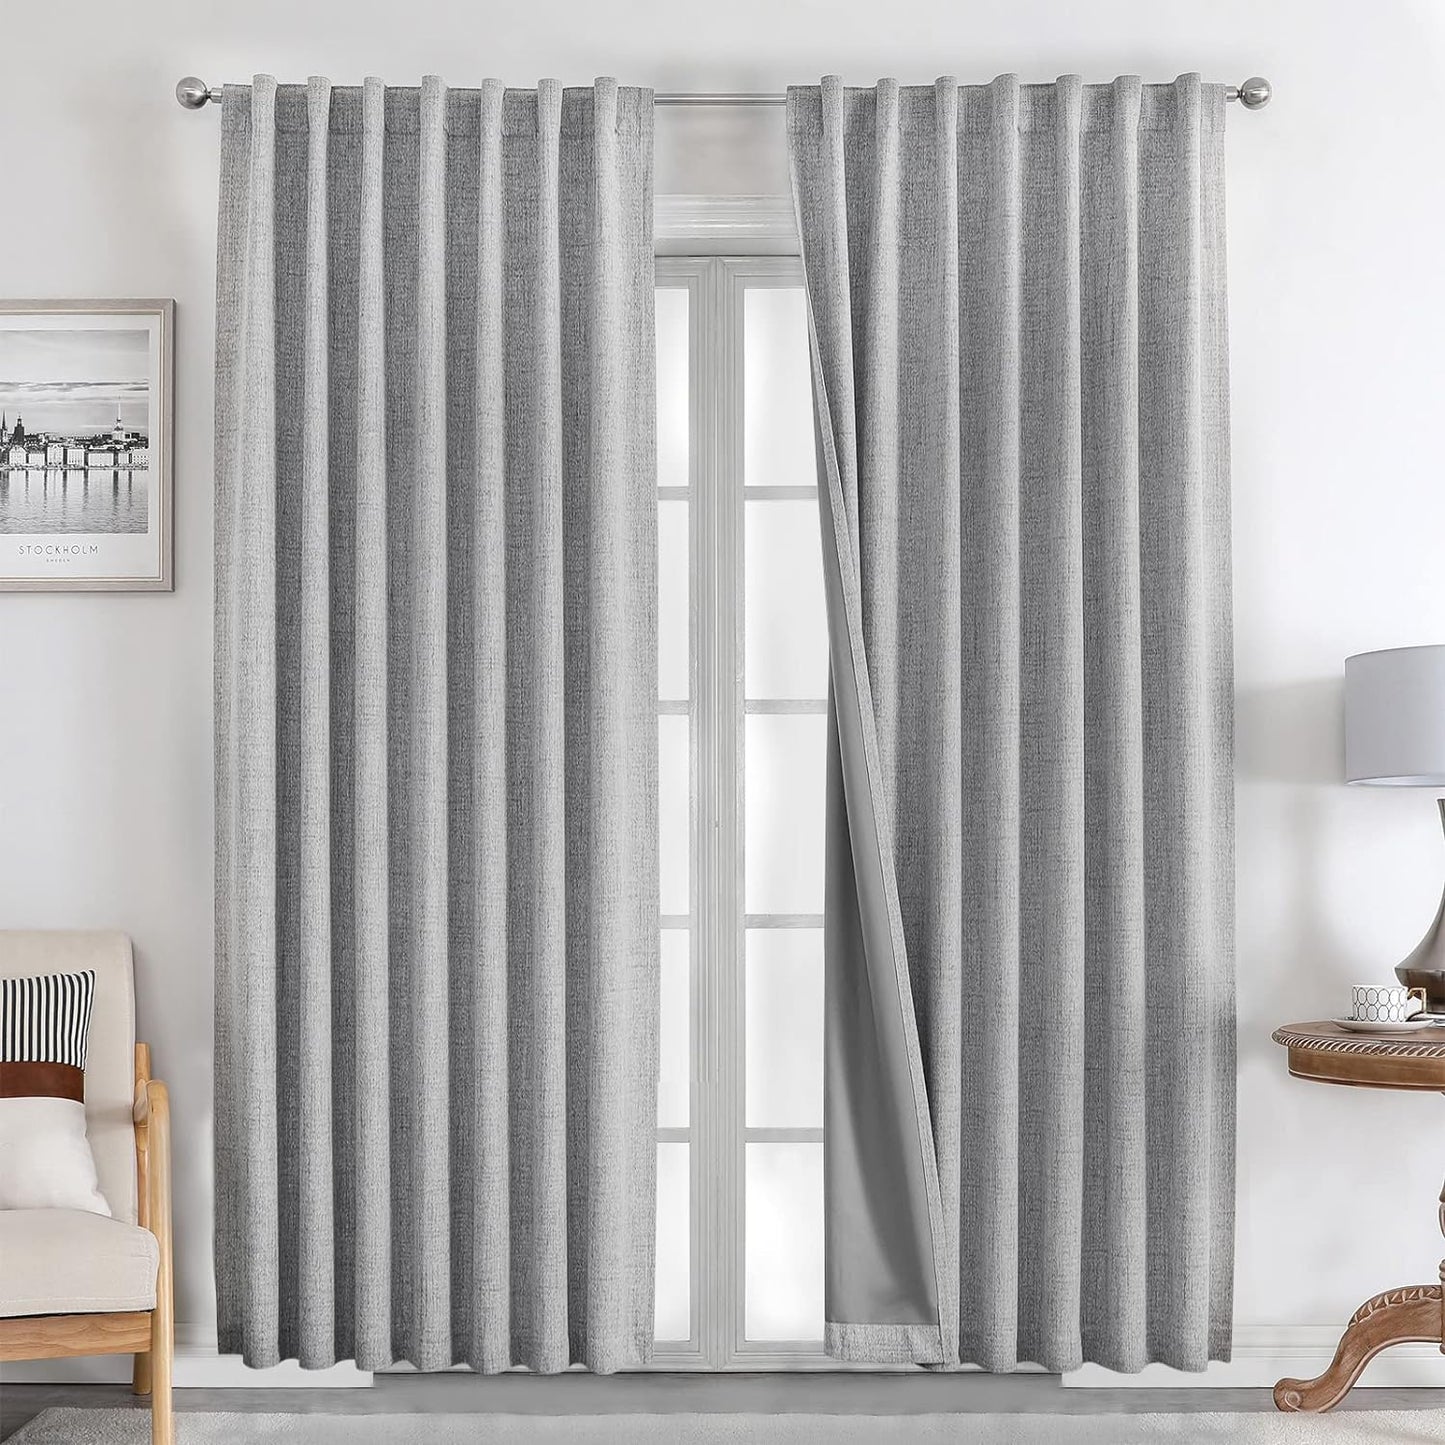 Joydeco 100% Black Out Curtains 96 Inch Long 1 Panels Burg Natural Blackout Linen Drapes for Bedroom Living Room Darkening Curtain Thermal Insulated Back Tab Rod Pocket(70X96 Inch,Black)  Joydeco Light Grey 37W X 84L Inch X 2 Panels 